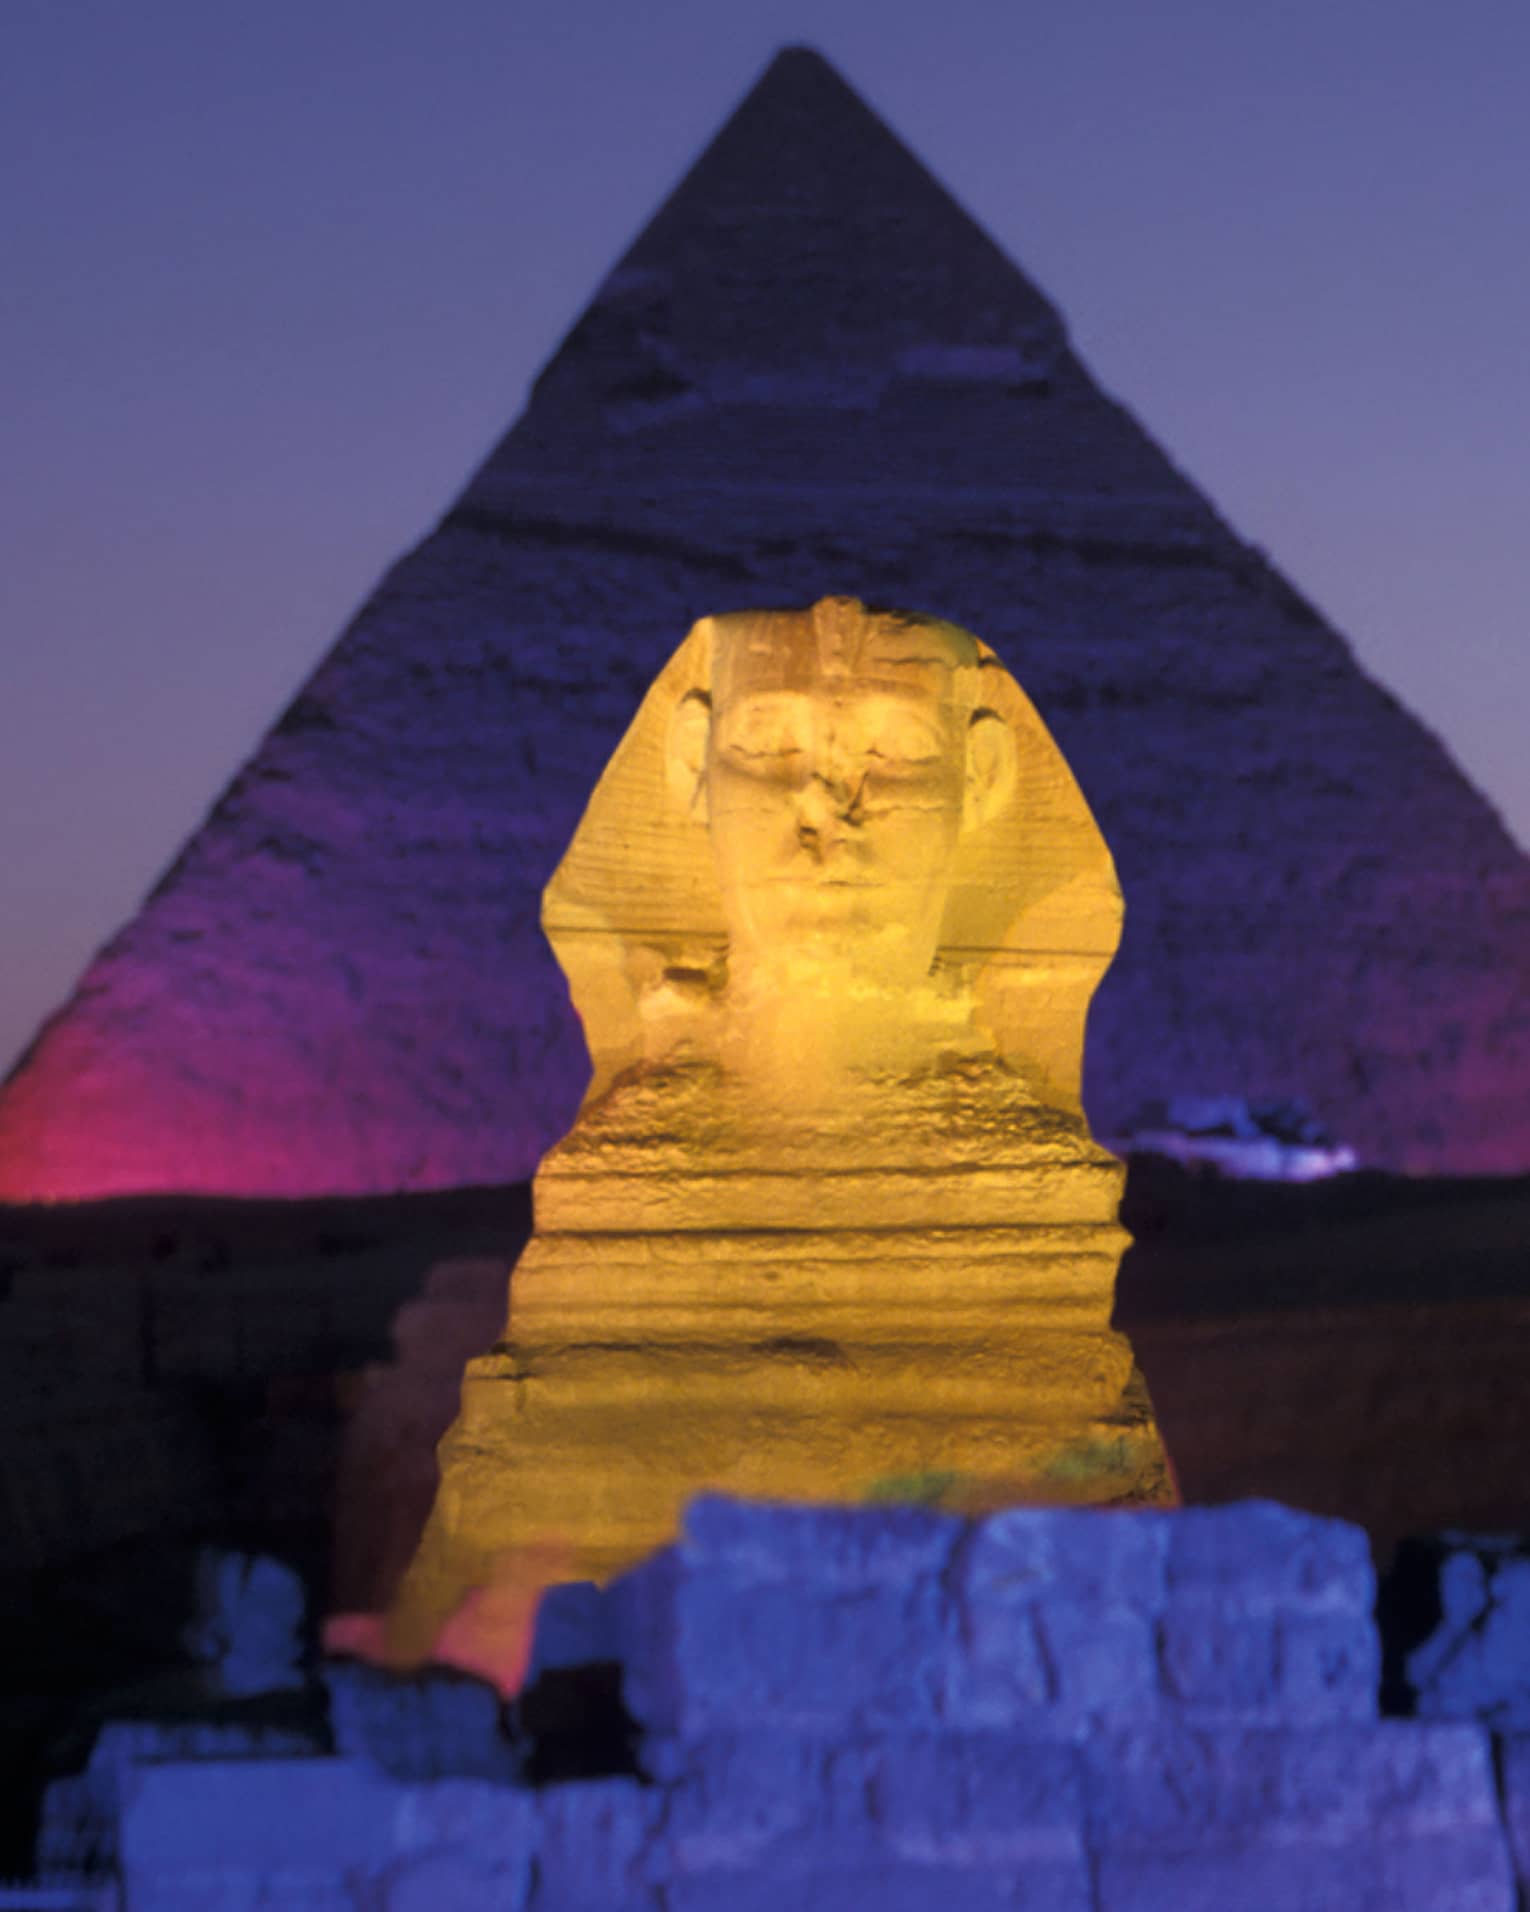 Night view of Pyramids of Giza and Great Sphinx illuminated